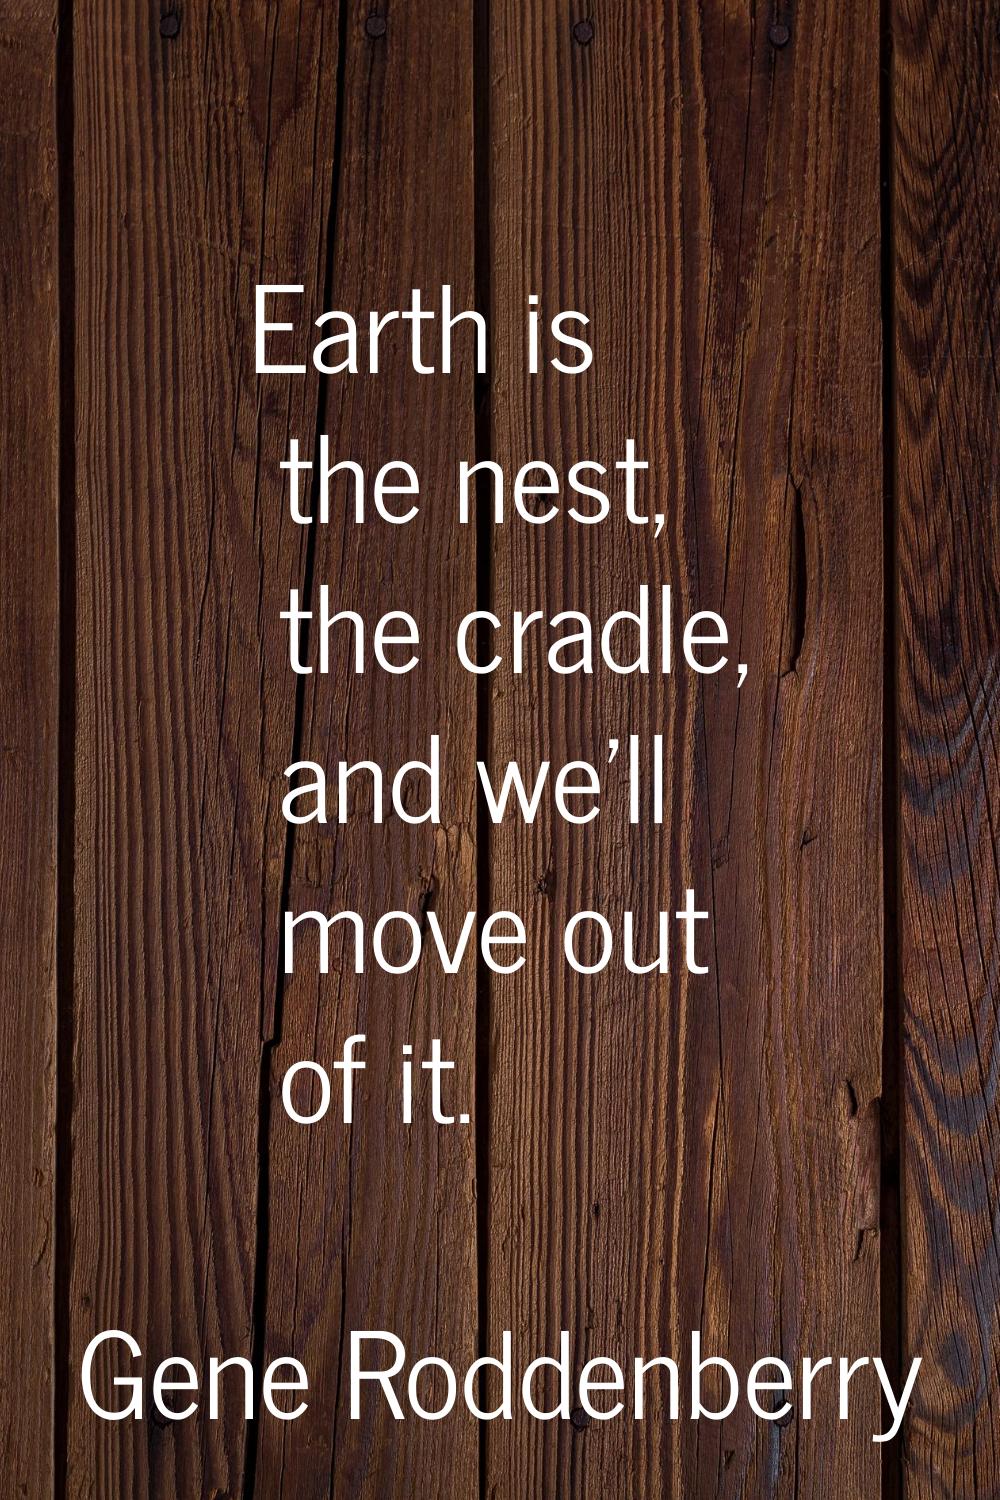 Earth is the nest, the cradle, and we'll move out of it.